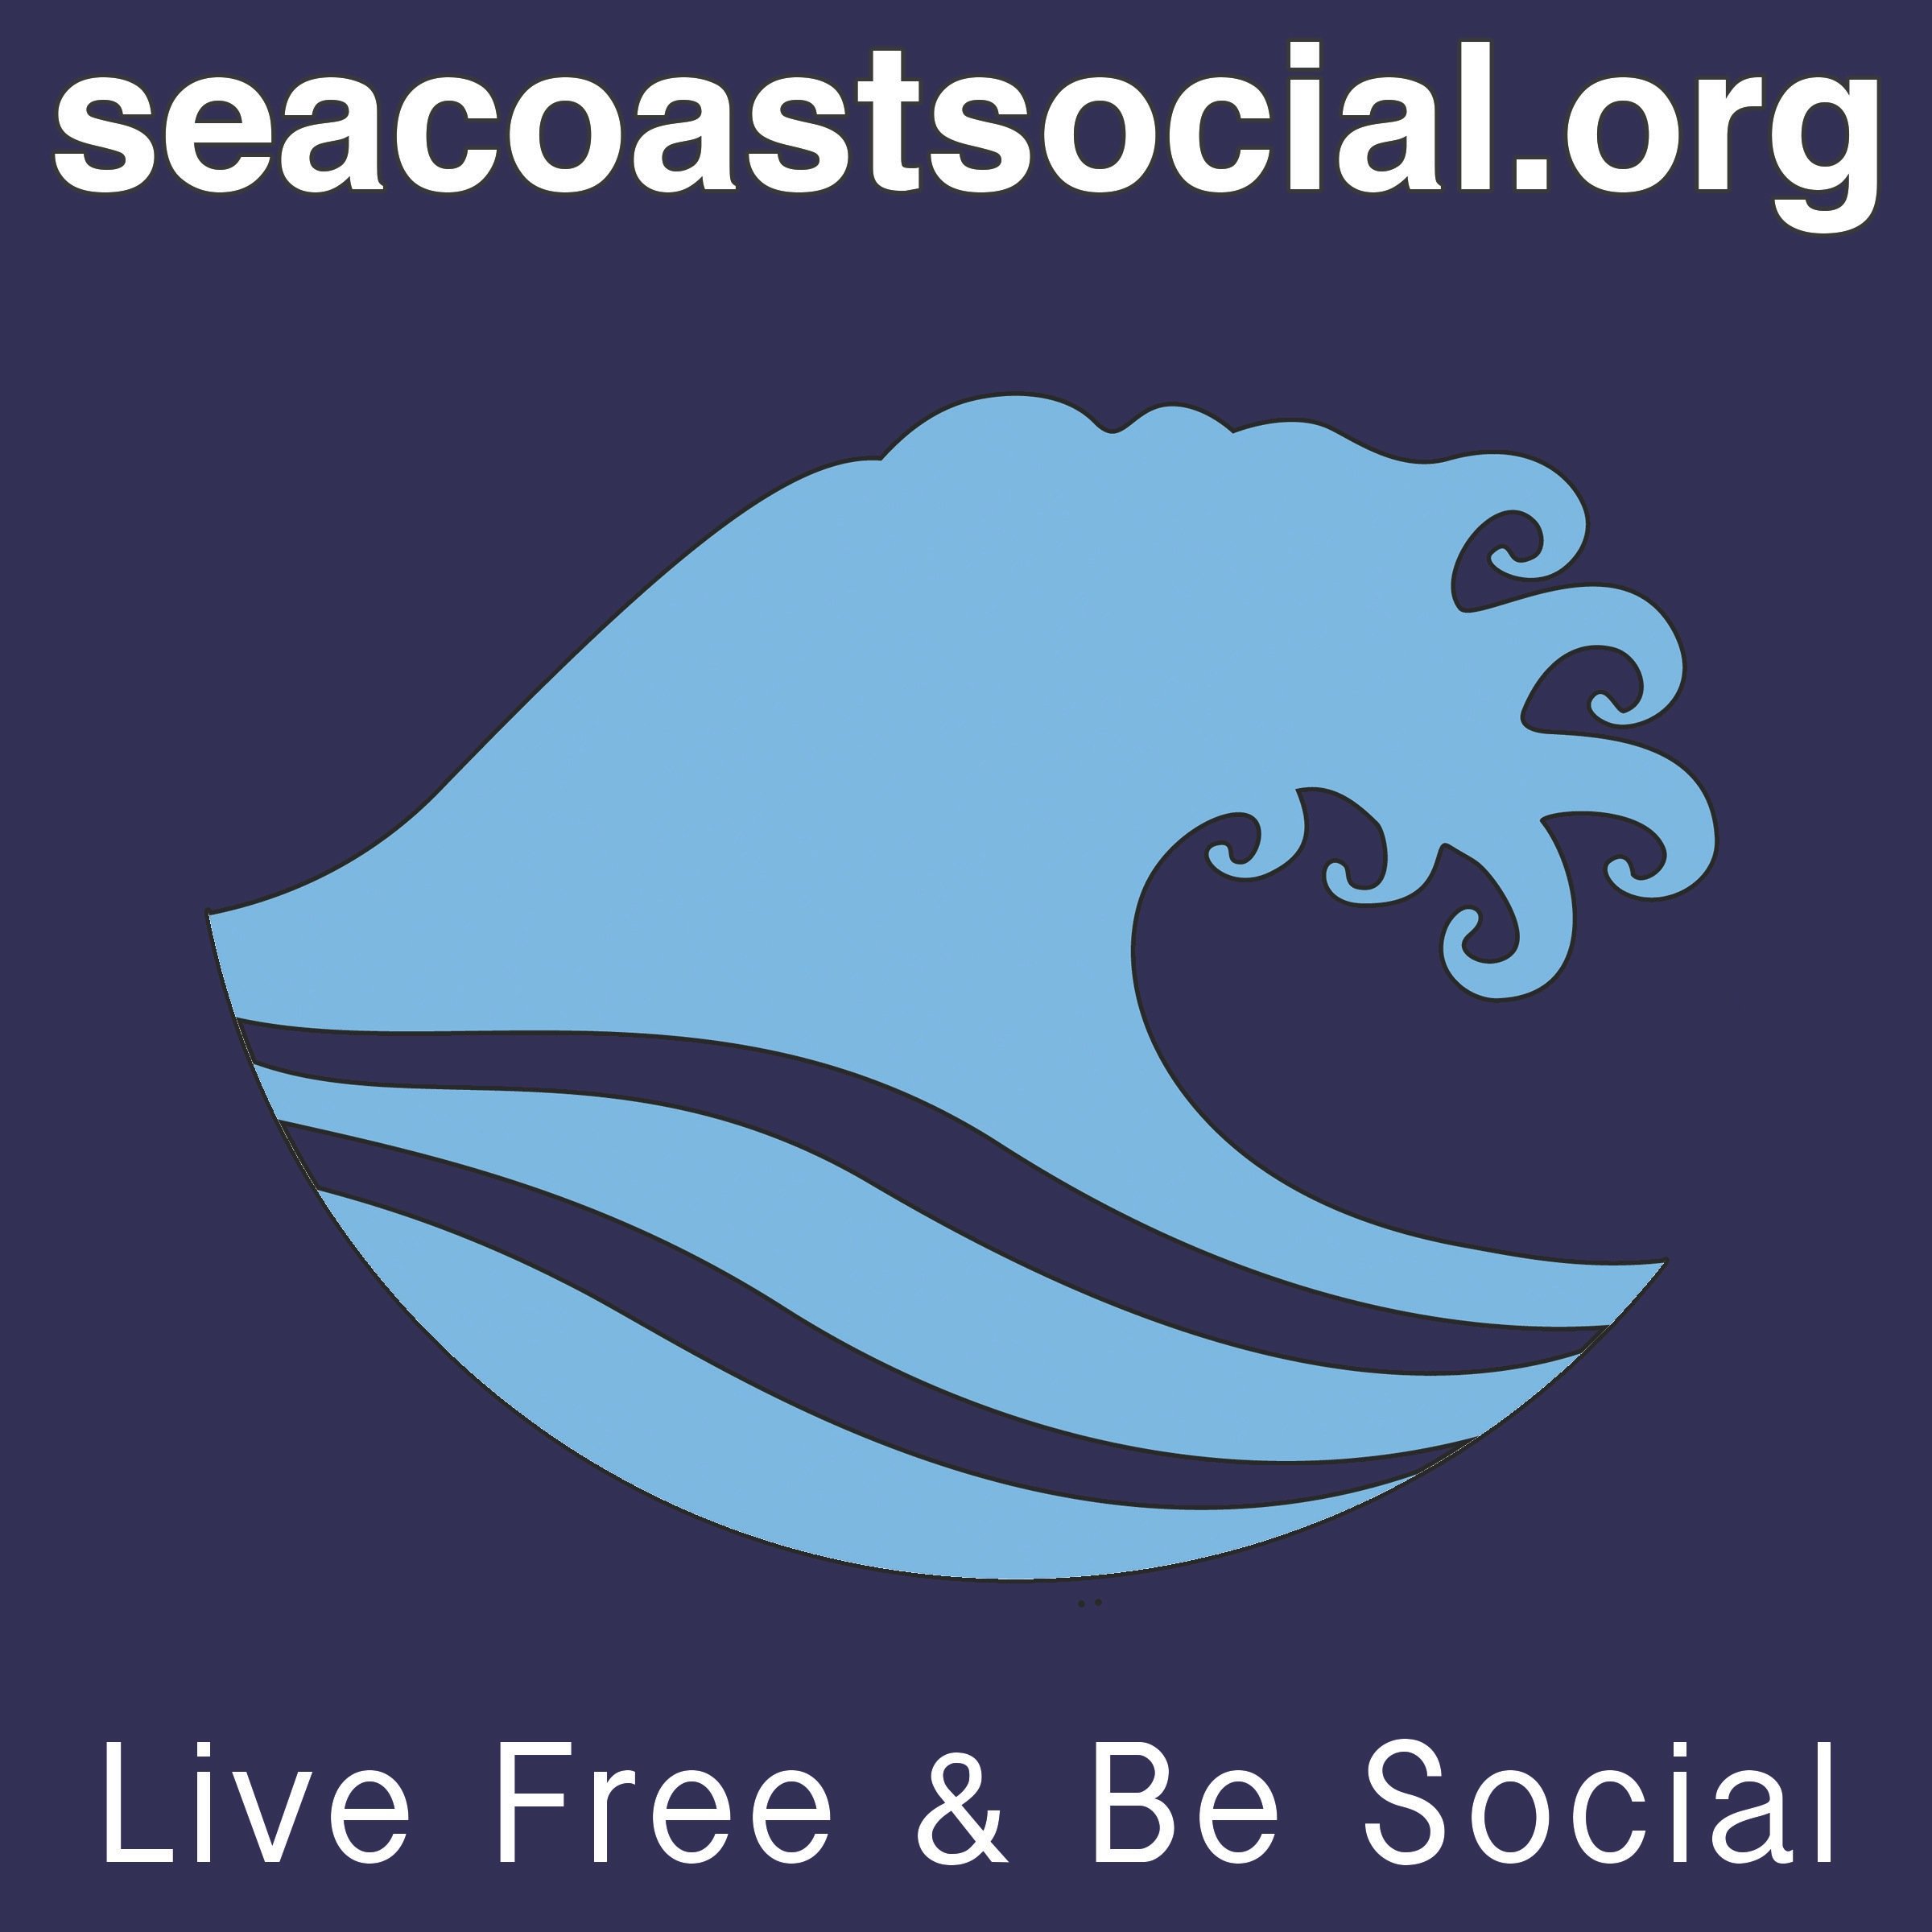 Our mission: To provide social media education and networking throughout the professional seacoast area. Our goal is to expand social media literacy!